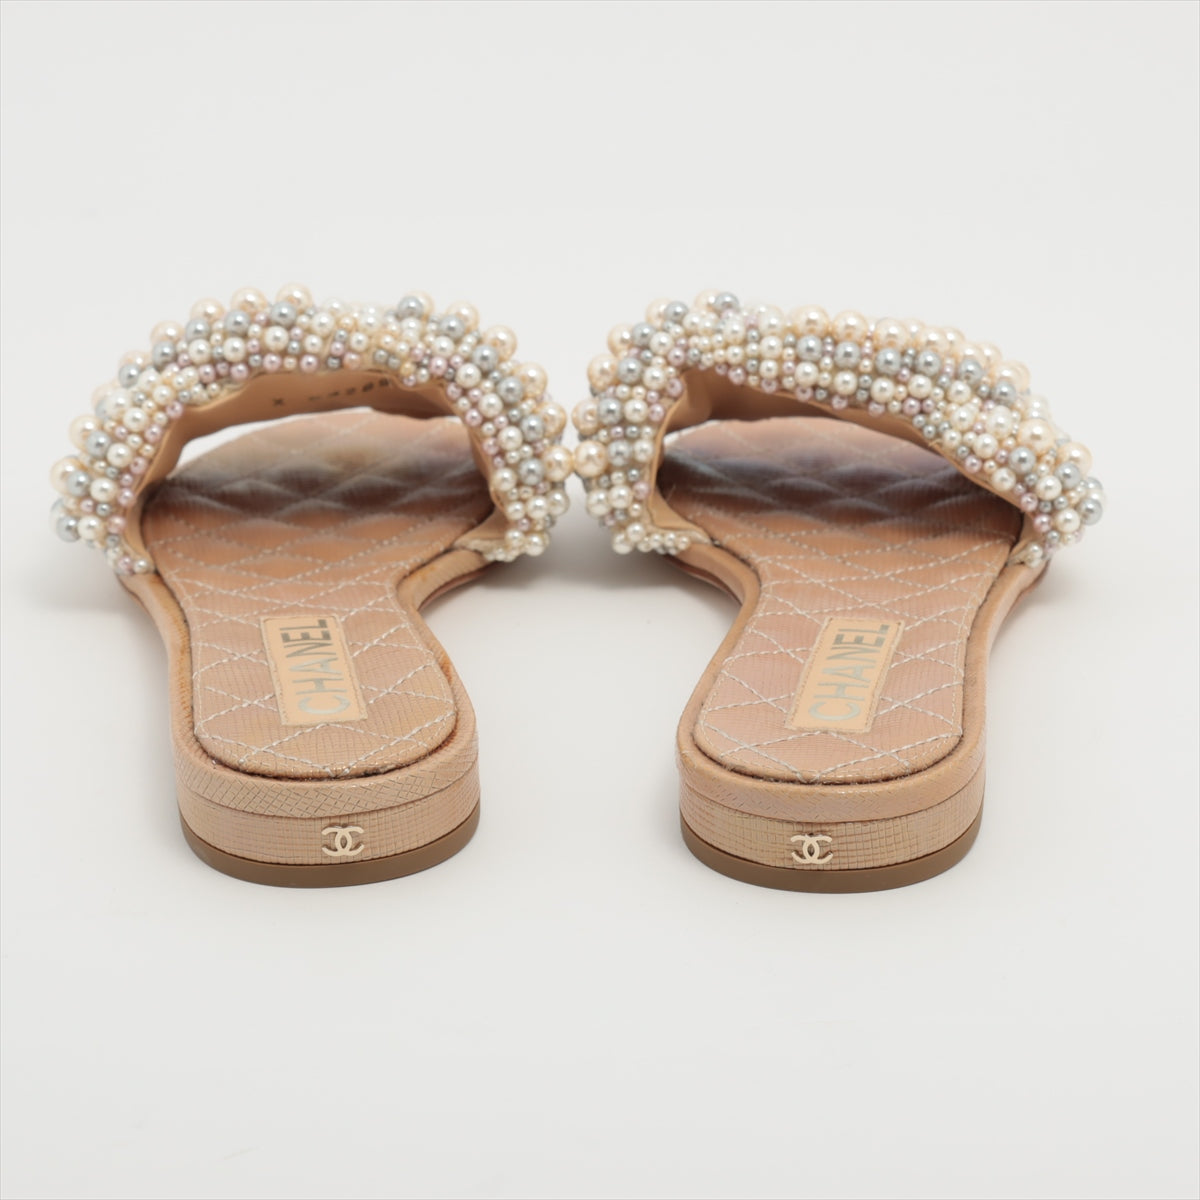 Chanel Coco Mark Faux pearls Sandals 38C Ladies' Beige G32895 There is a bag